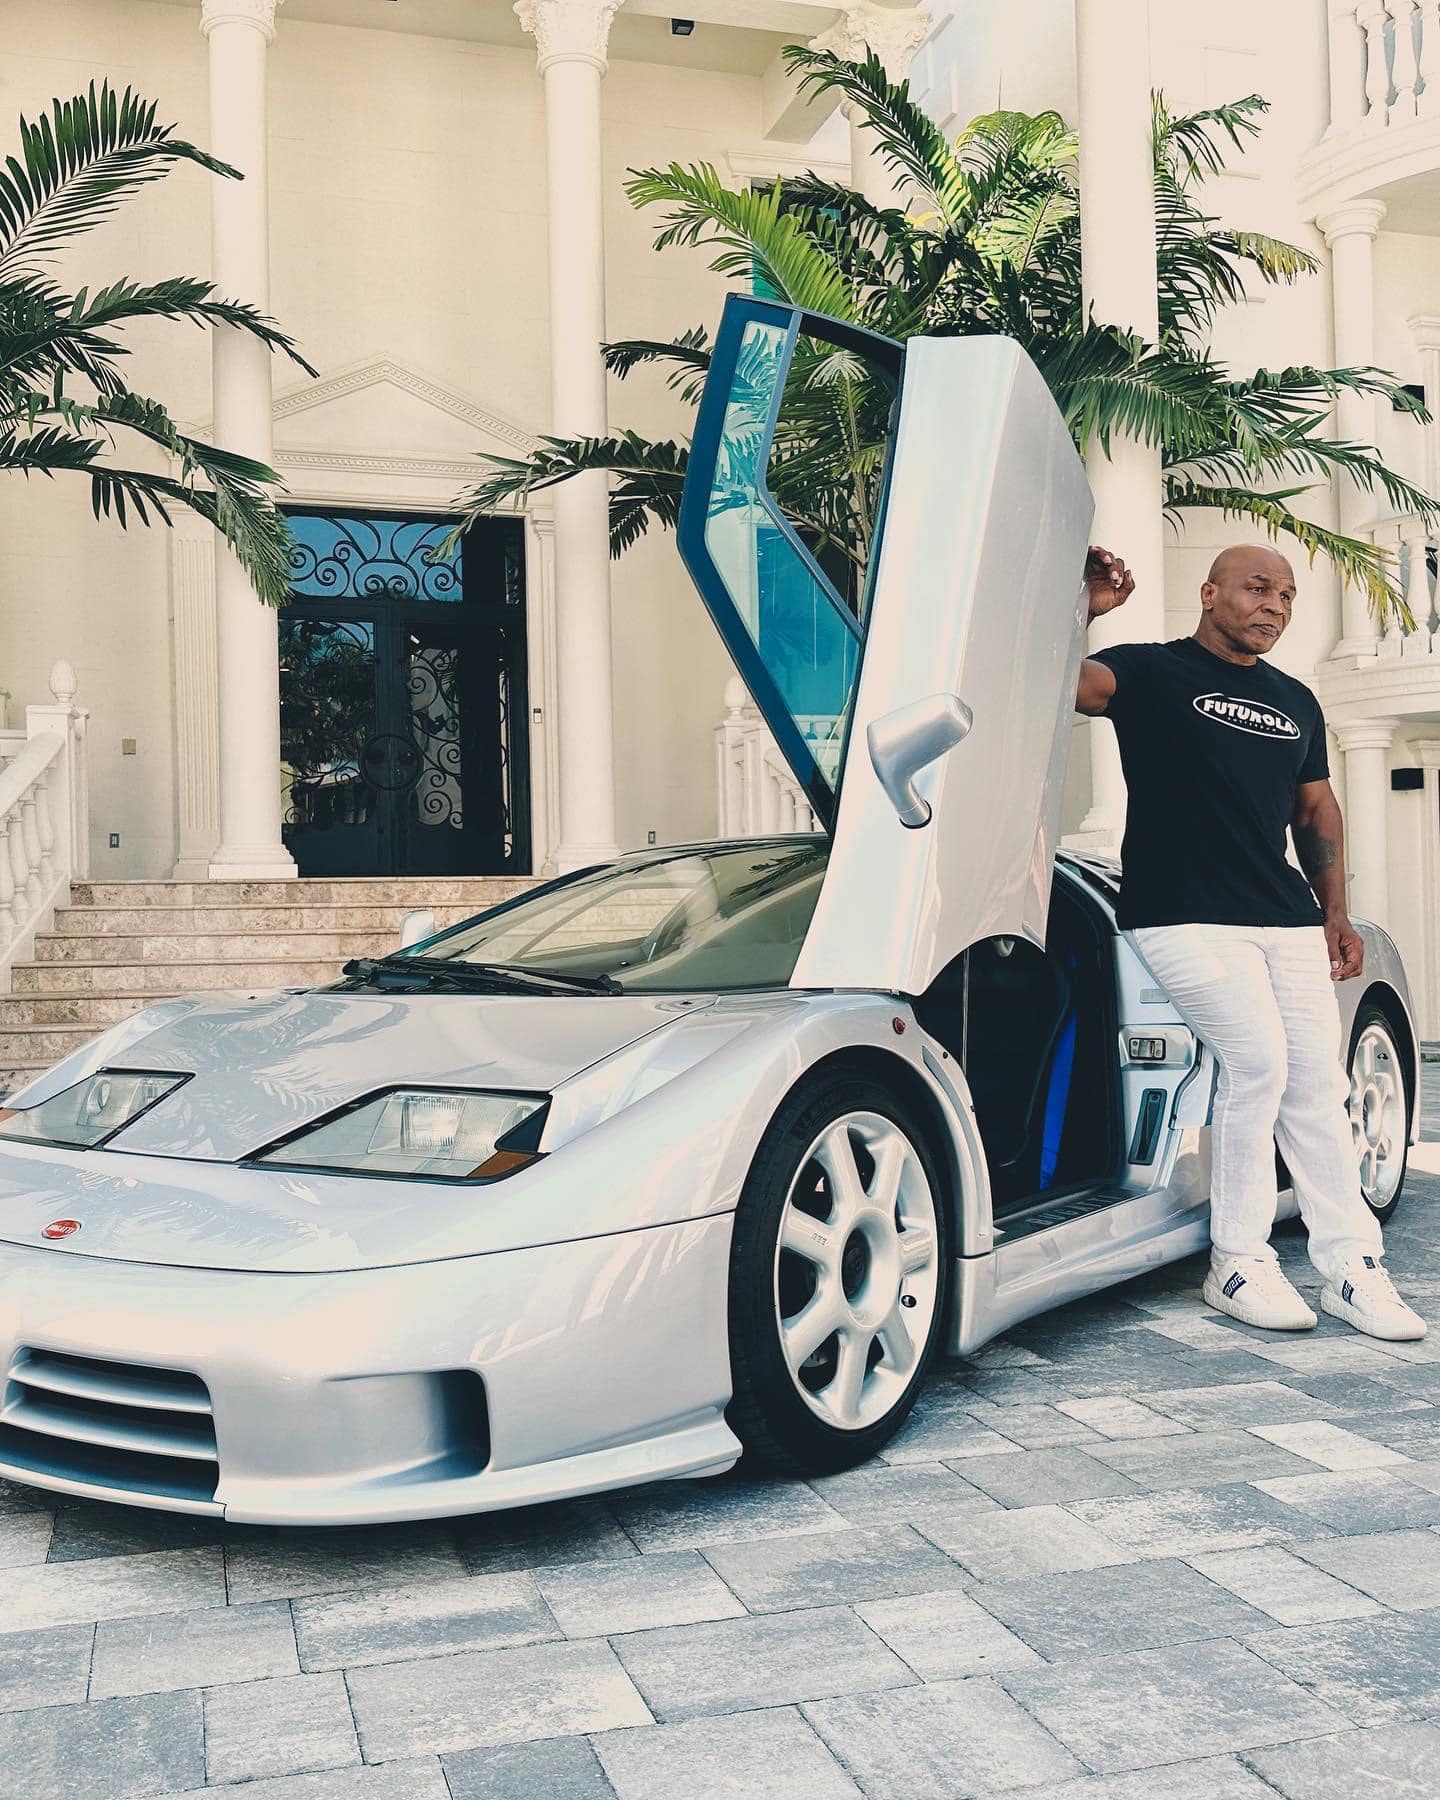 bao eminem surprised the entire world by gifting mike tyson a super rare bugatti eb supercar to celebrate their collaboration on a new song and his remarkable success 6546b387b9aca Eminem Surprised The Entire World By Gifting Mike Tyson A Super Rare Bugatti Eb 110 Supercar To Celebrate Their Collaboration On A New Song And His Remarkable Success.